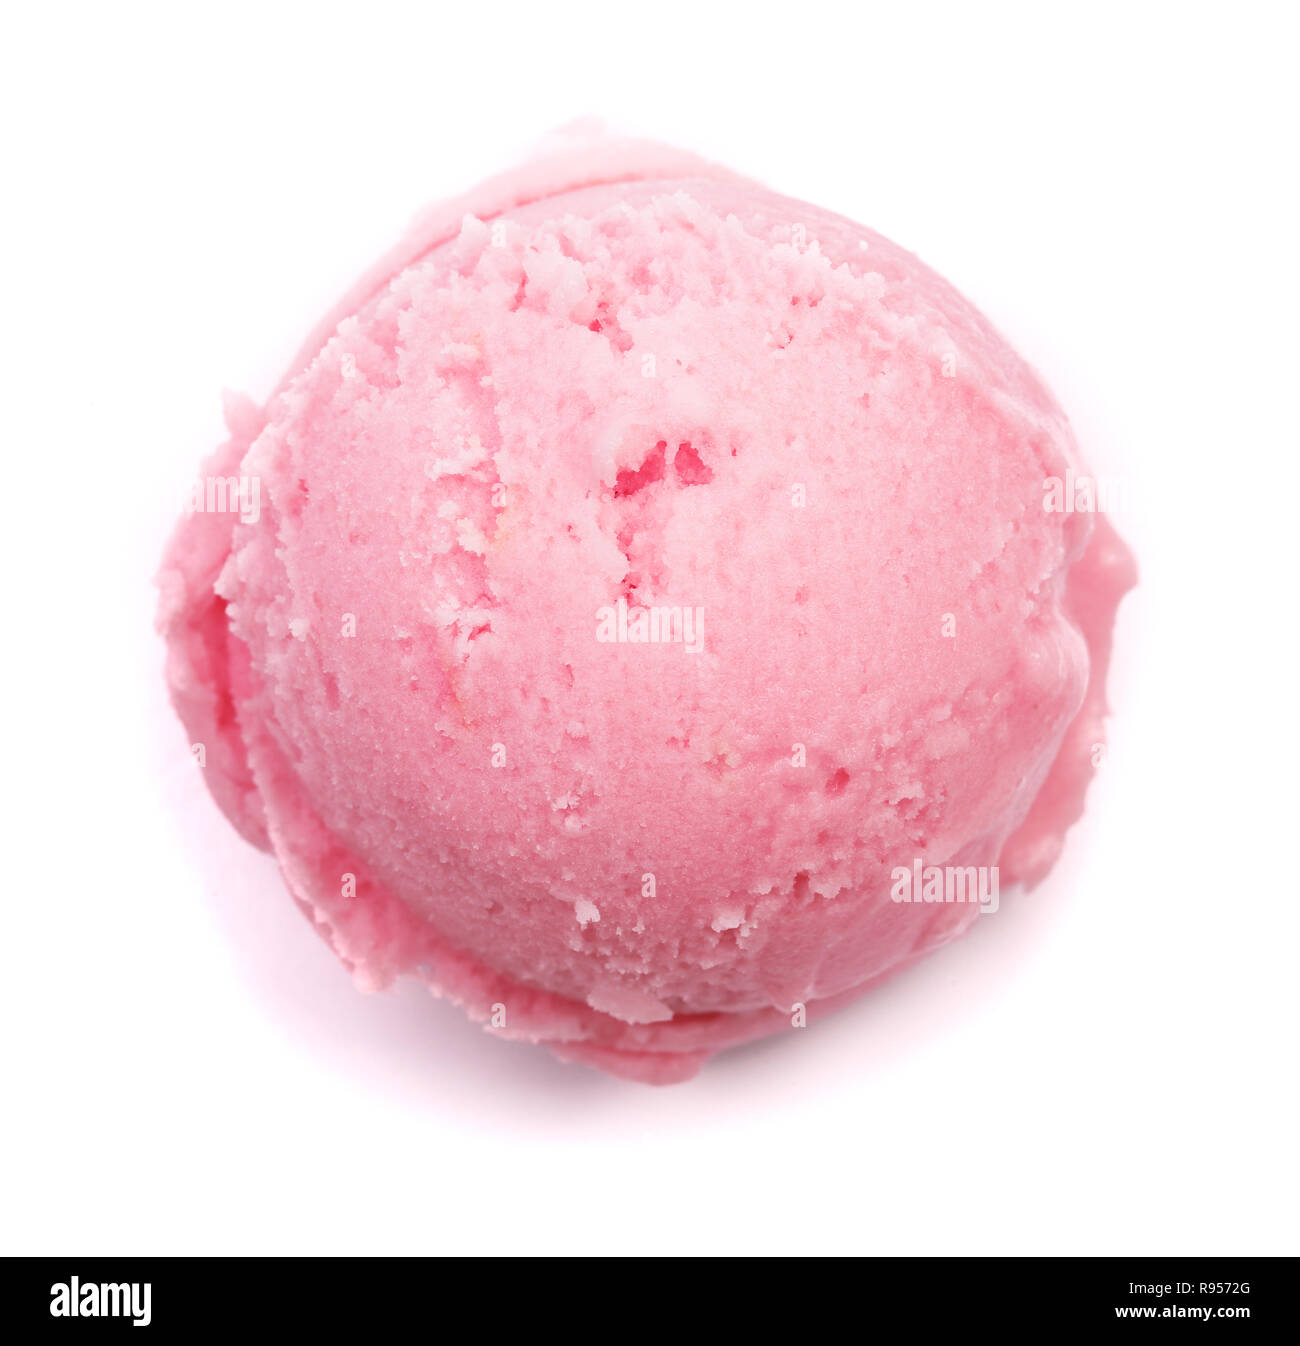 Pink ice cream ball Stock Photo by ©magone 130647898